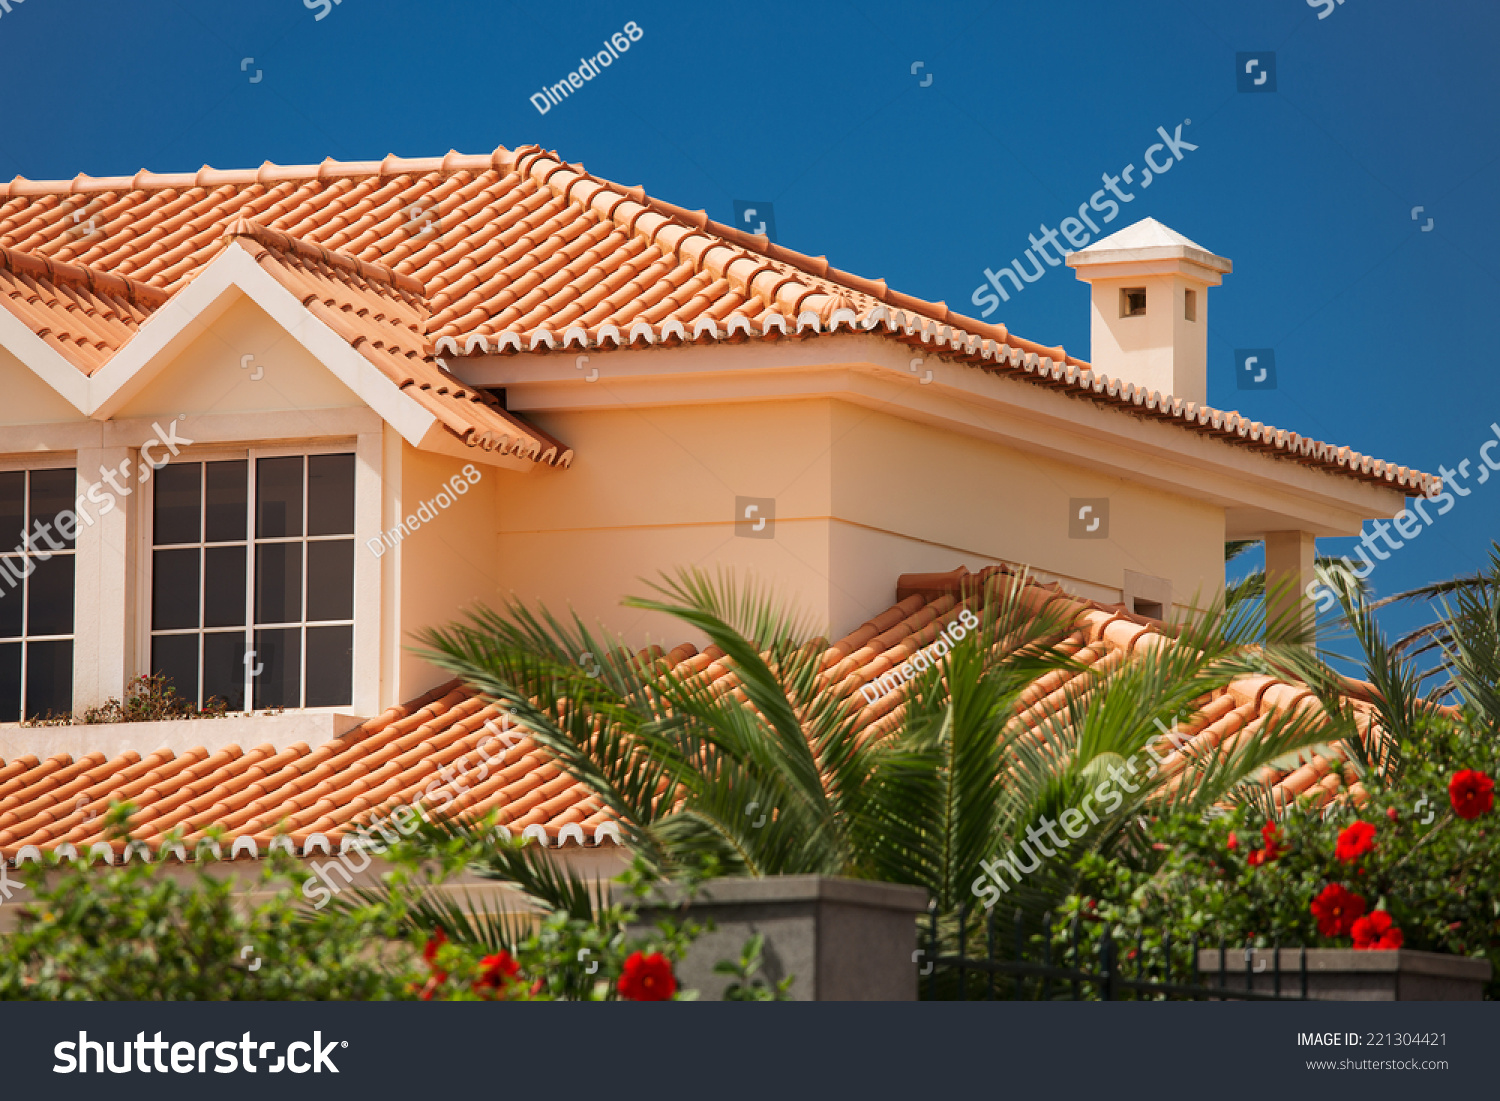 Orange Tiled Roof Of A Large House Stock Photo 221304421 